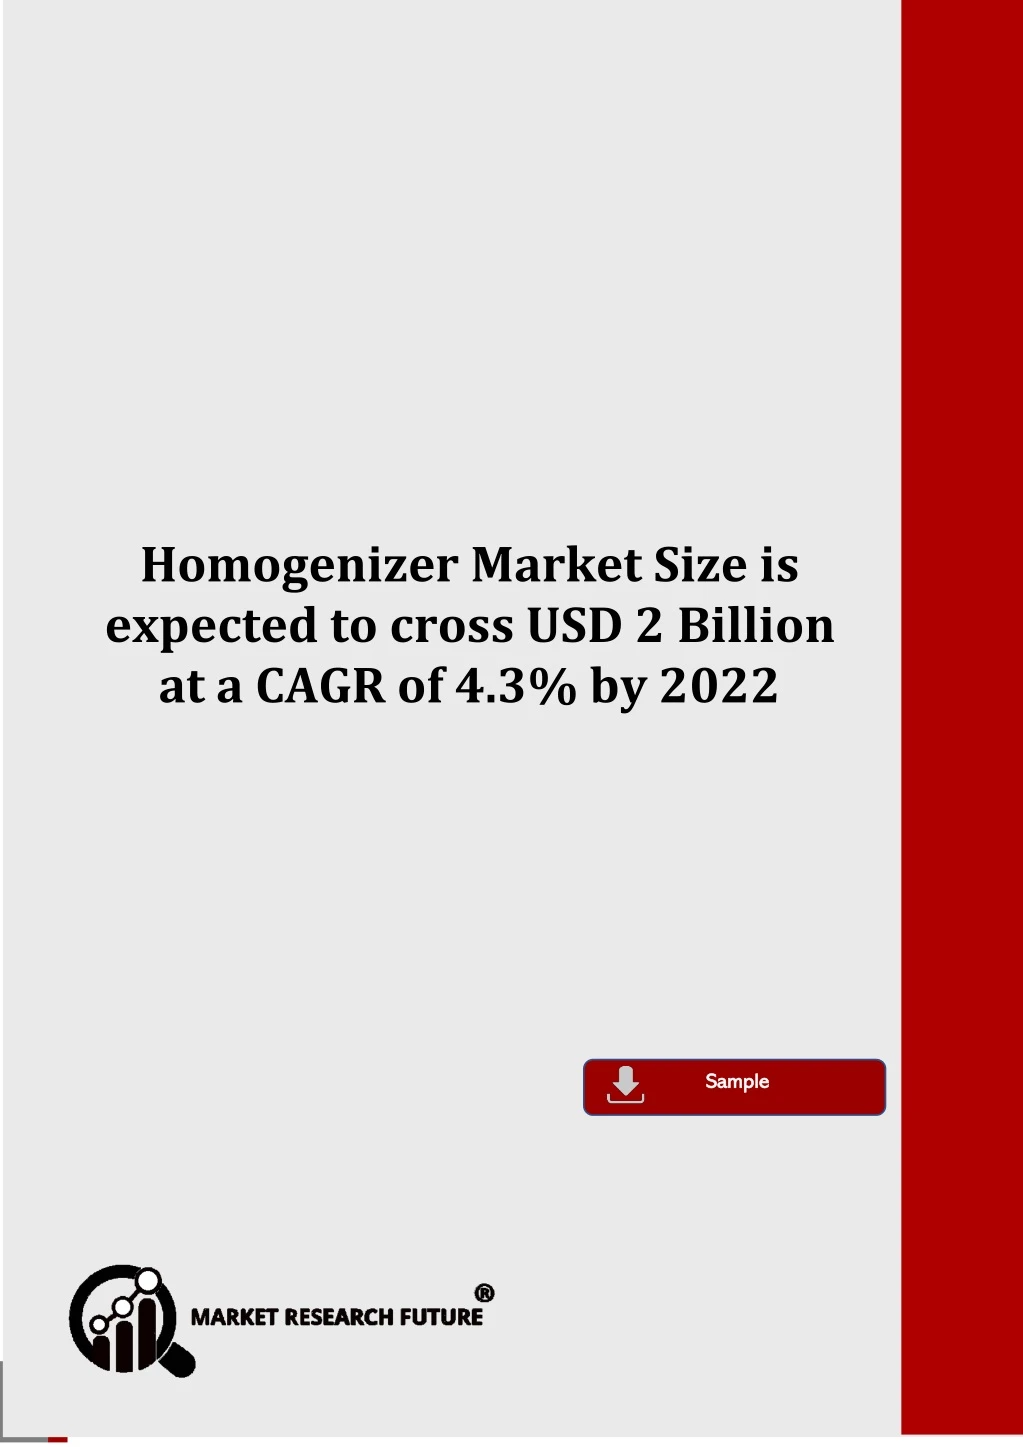 homogenizer market size is expected to cross